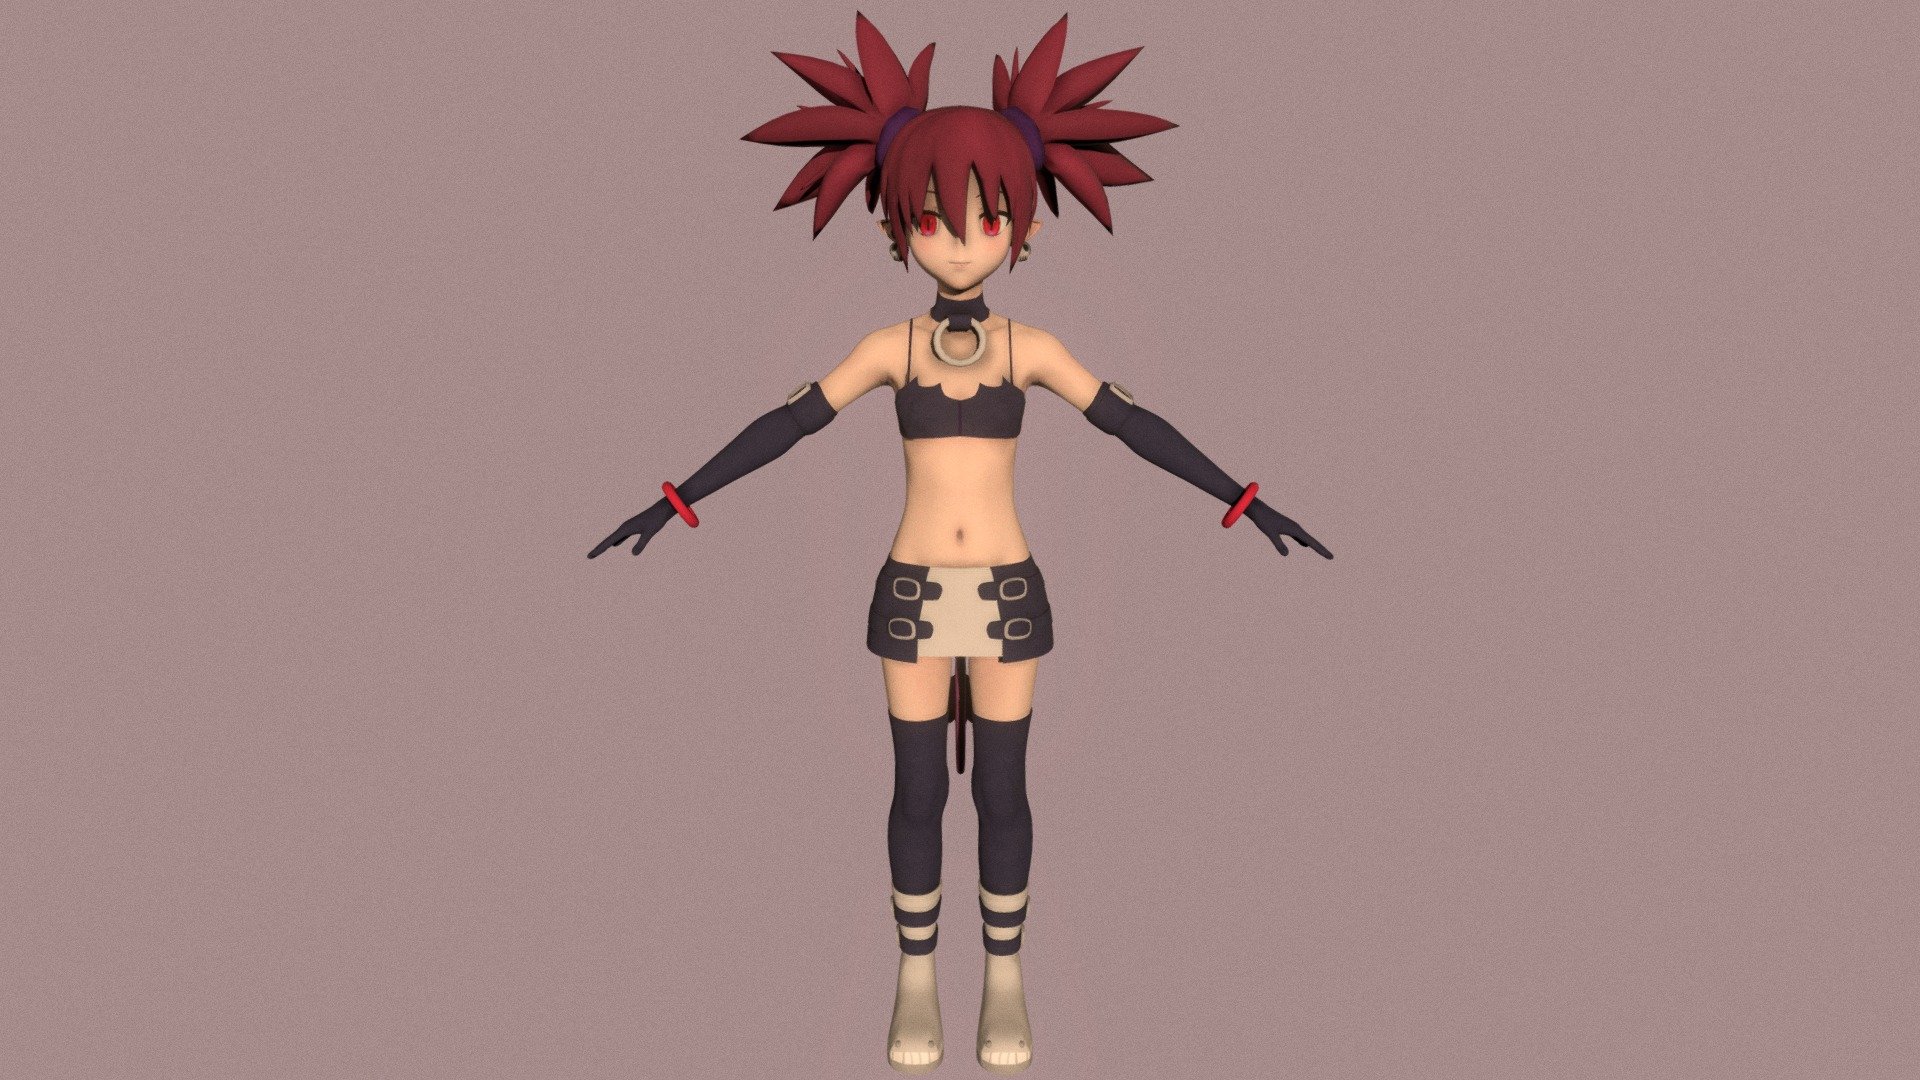 T-pose rigged model of anime girl Etna (Disgaea).

Body and clothings are rigged and skinned by 3ds Max CAT system.

Eye direction and facial animation controlled by Morpher modifier / Shape Keys / Blendshape.

This product include .FBX (ver. 7200) and .MAX (ver. 2010) files.

3ds Max version is turbosmoothed to give a high quality render (as you can see here).

Original main body mesh have ~7.000 polys.

This 3D model may need some tweaking to adapt the rig system to games engine and other platforms.

I support convert model to various file formats (the rig data will be lost in this process): 3DS; AI; ASE; DAE; DWF; DWG; DXF; FLT; HTR; IGS; M3G; MQO; OBJ; SAT; STL; W3D; WRL; X.

You can buy all of my models in one pack to save cost: https://sketchfab.com/3d-models/all-of-my-anime-girls-c5a56156994e4193b9e8fa21a3b8360b

And I can make commission models.

If you have any questions, please leave a comment or contact me via my email 3d.eden.project@gmail.com 3d model